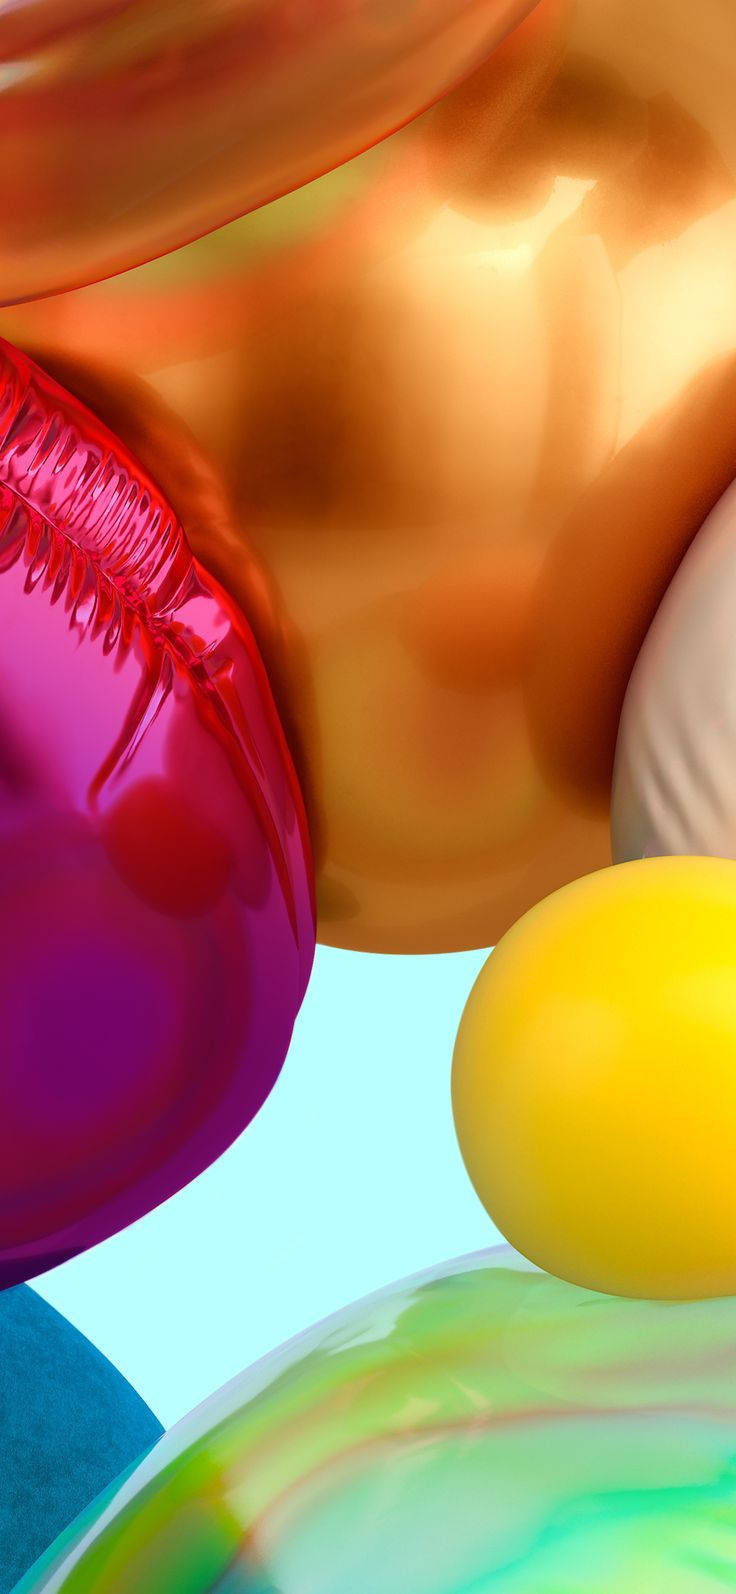 Samsung A71 Displaying A Captivating Wallpaper Of Multicolored Balloons Wallpaper